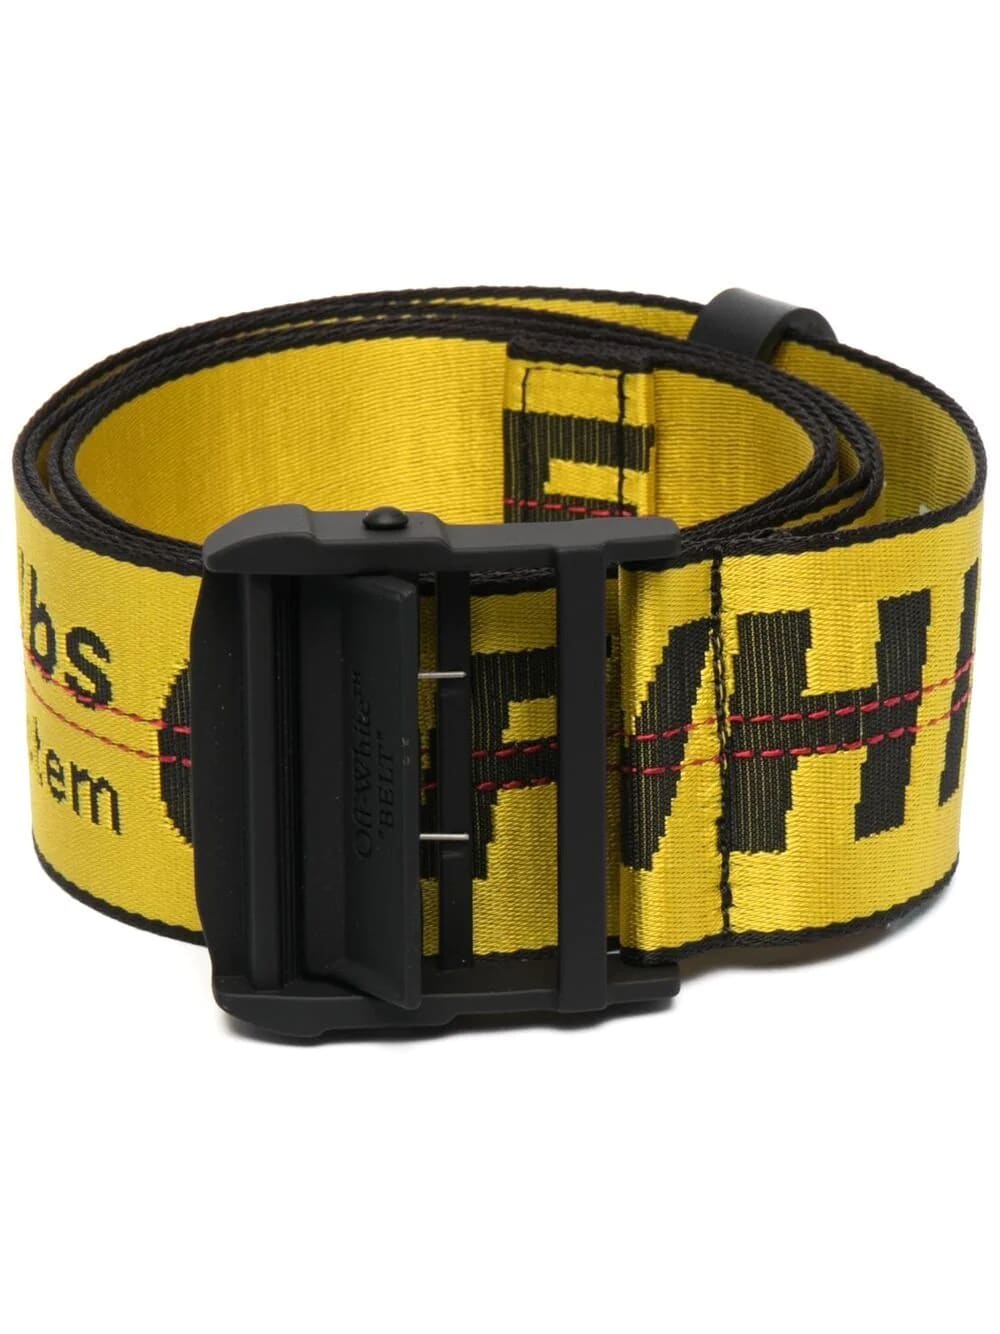 OFF-WHITE OFF-WHITE MAN YELLOW AND BLACK INDUSTRIAL BELT,OMTR011S21FAB001 1810